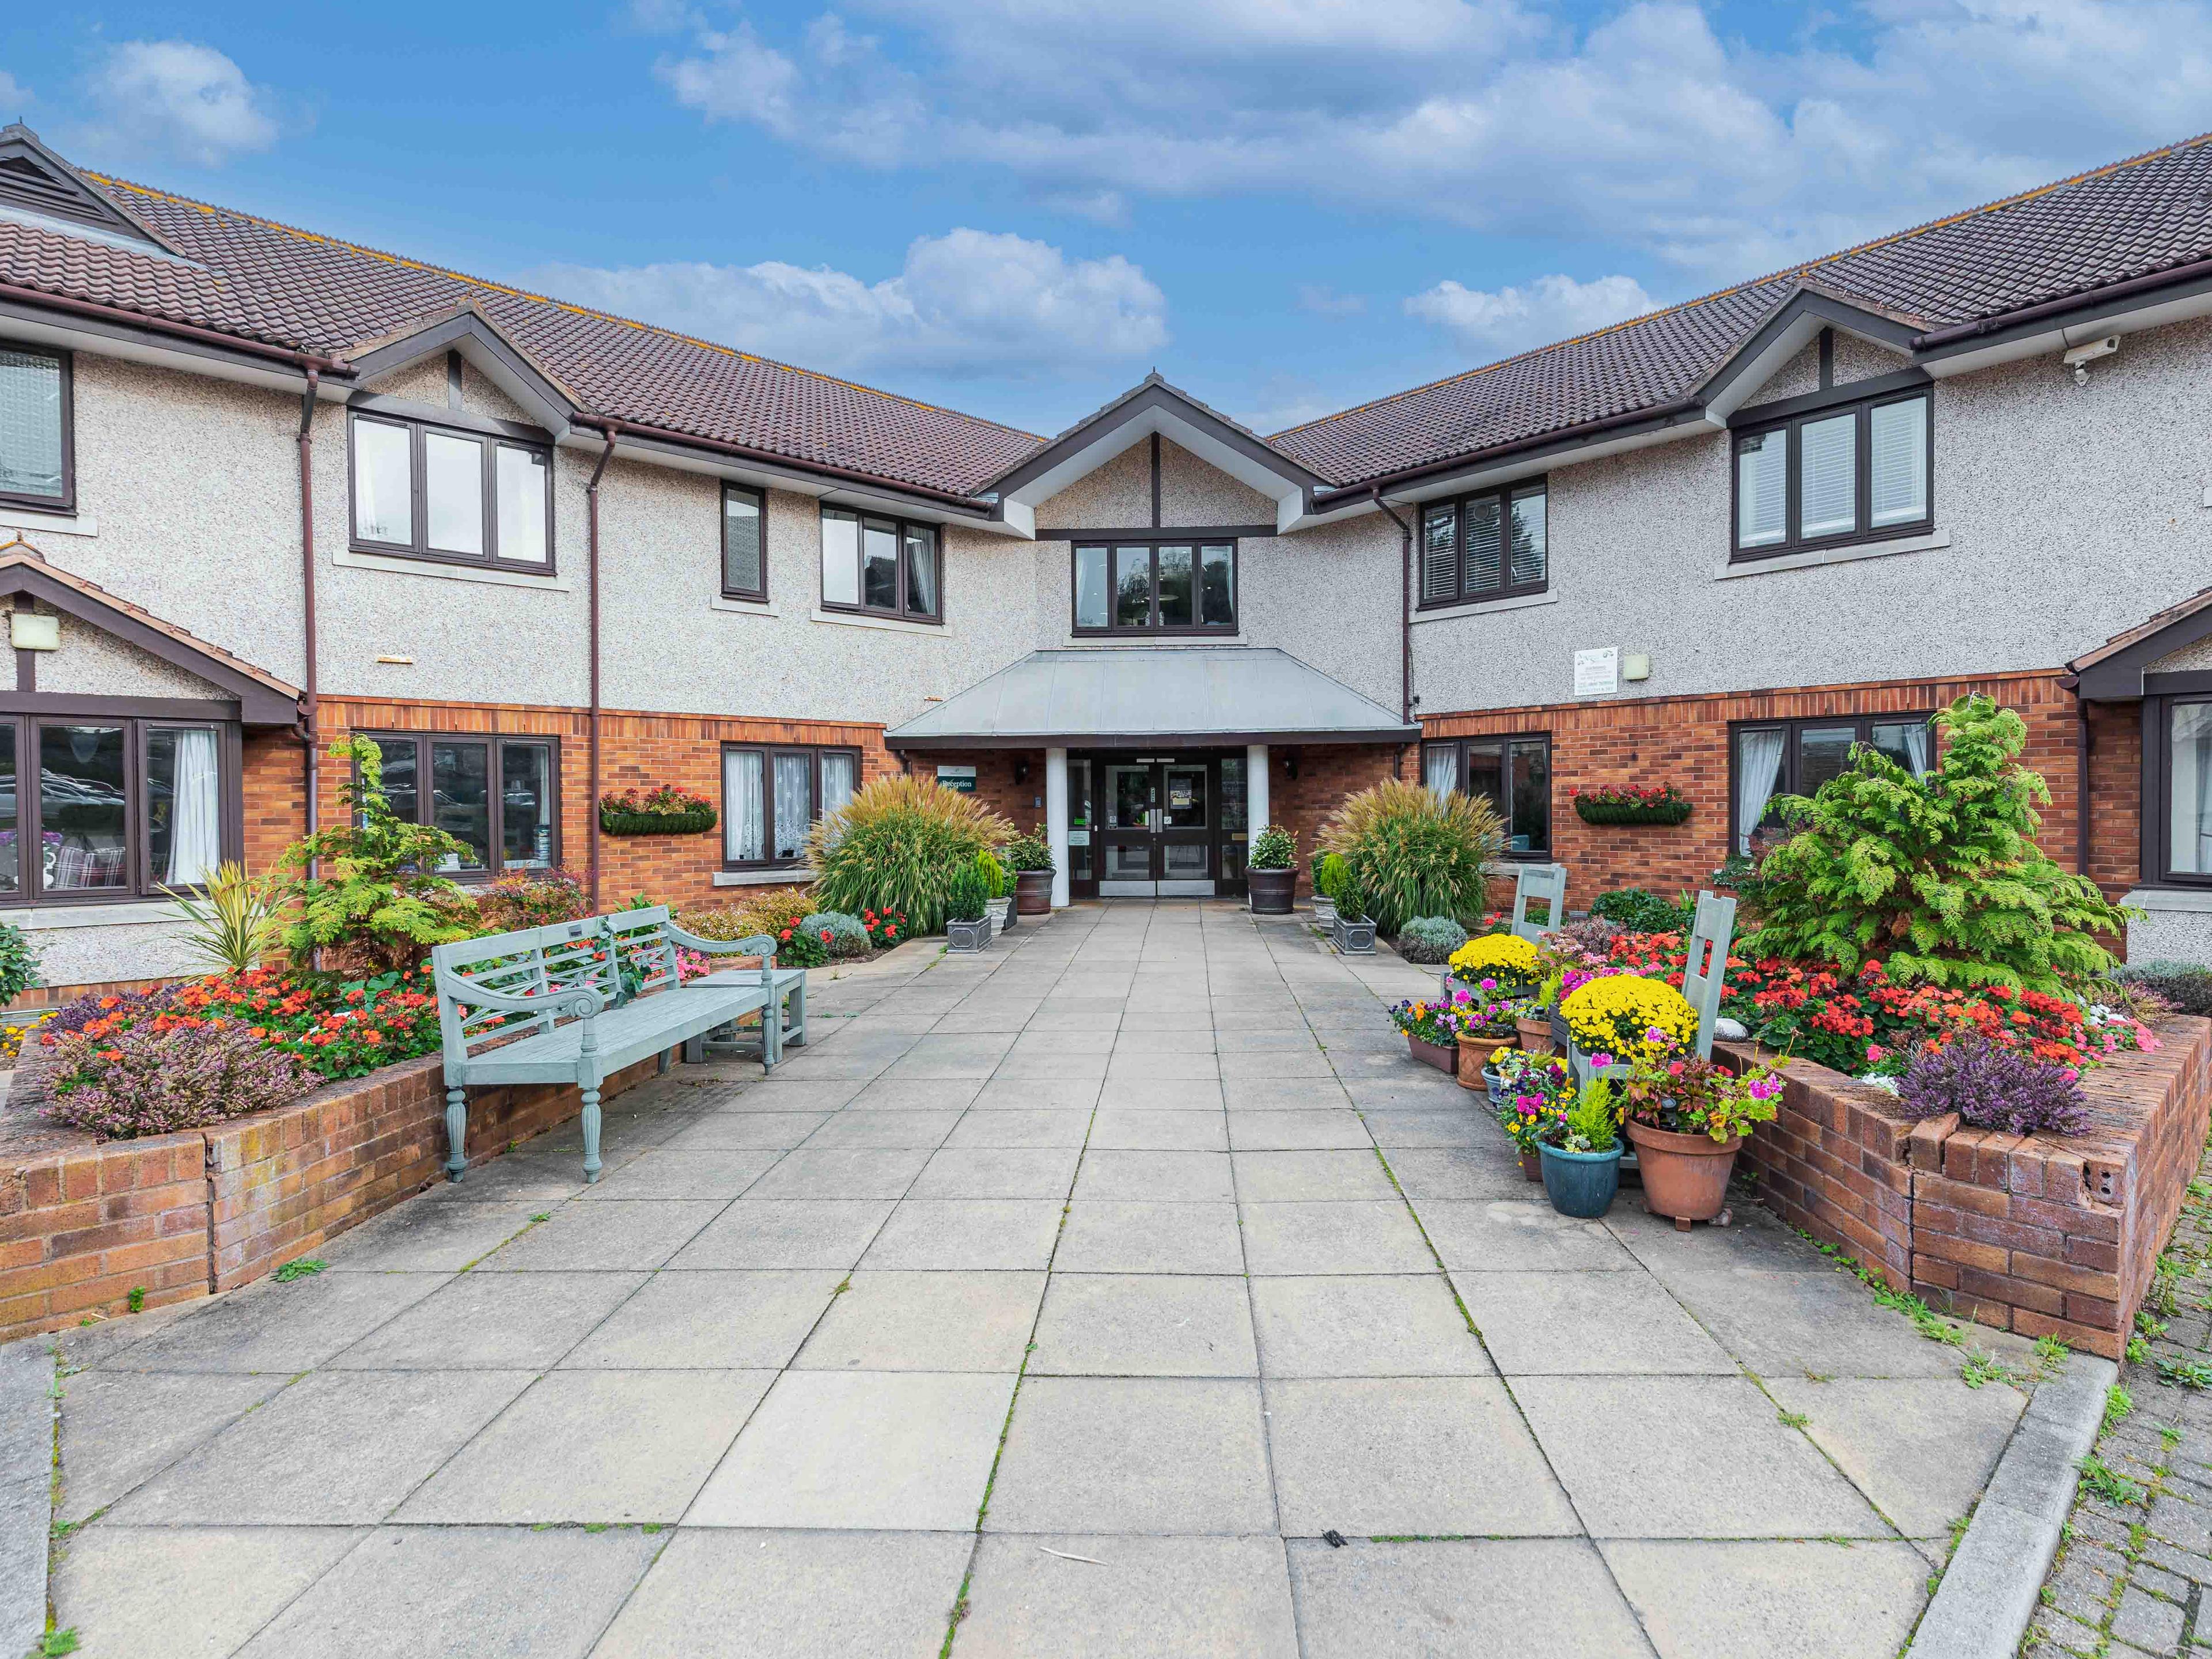 Paternoster House Care Home